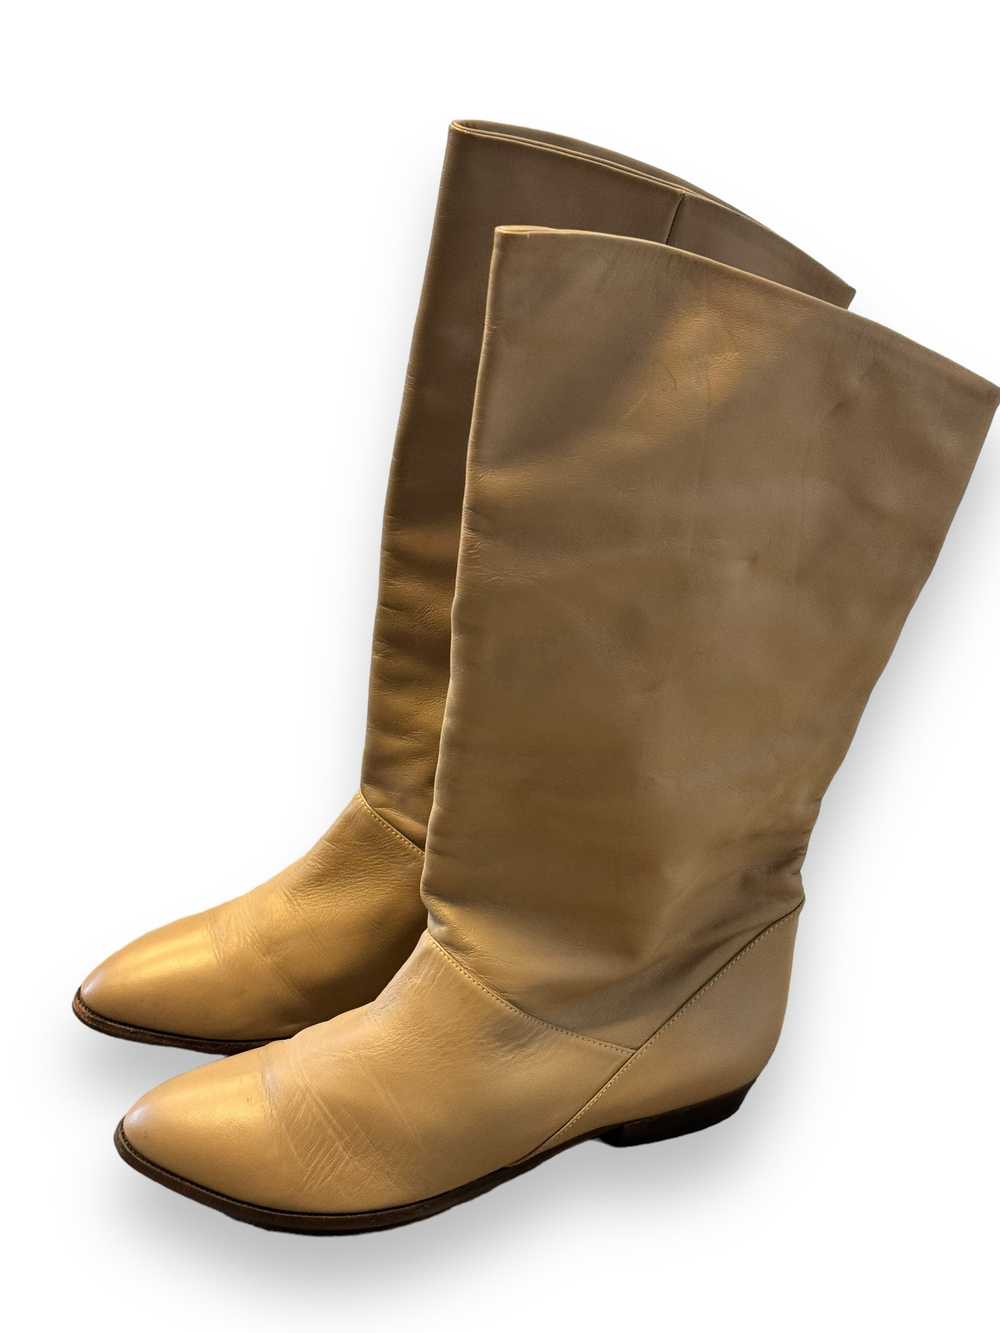 1980s Flat Beige Leather Boots - image 5